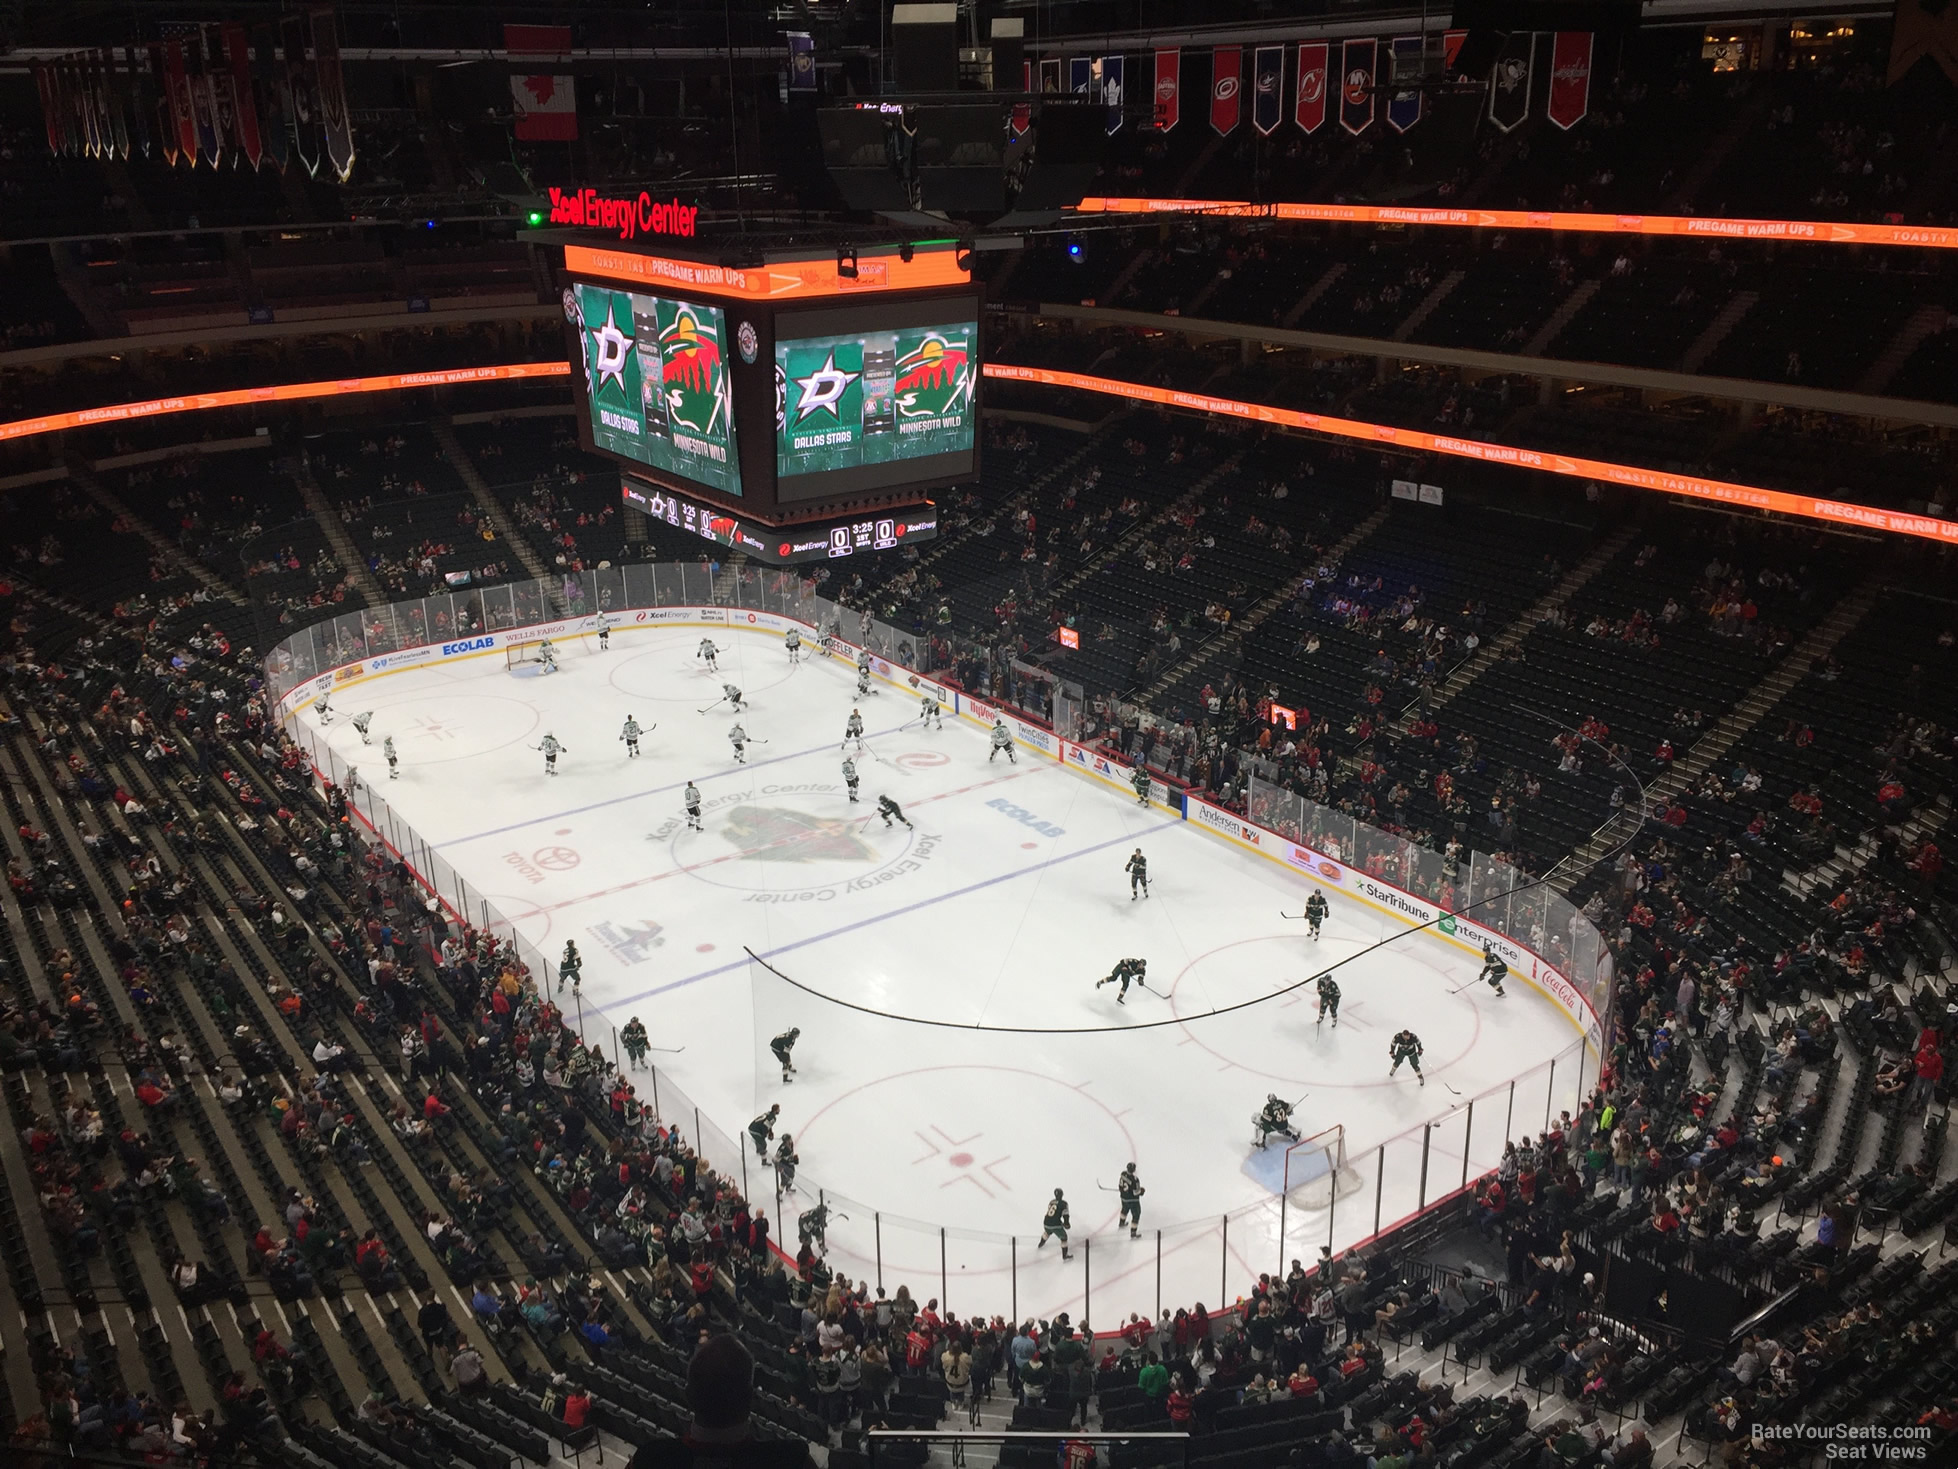 section 230, row 6 seat view  for hockey - xcel energy center